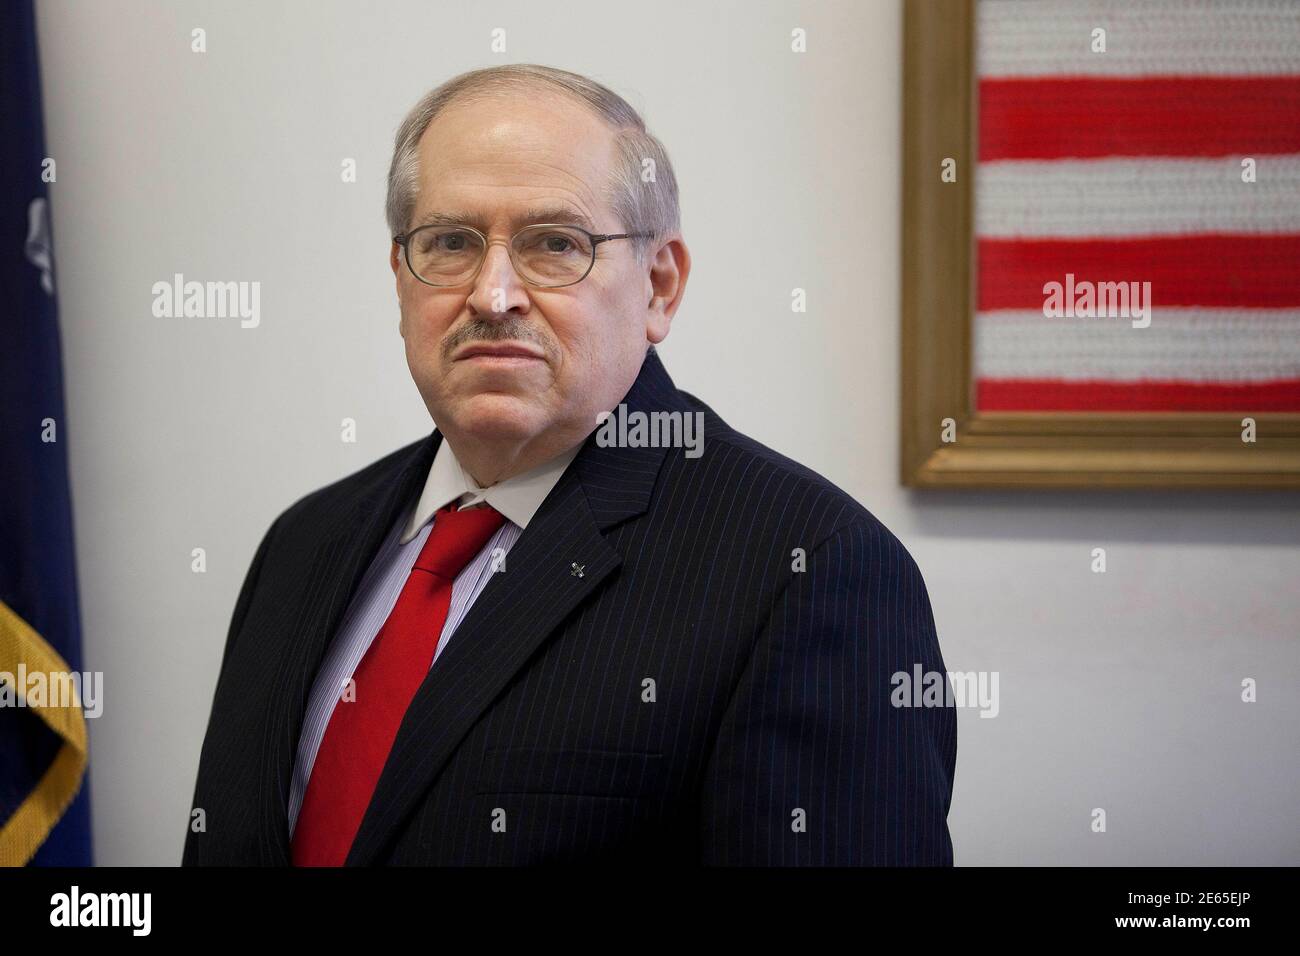 ATTENTION EDITORS - THIS PICTURE IS 12 OF 14 TO ACCOMPANY SPECIAL REPORT USA/FORECLOSURE. SEARCH KEYWORD ' FORECLOSURE' TO SEE ALL IMAGES PXP401-PXP414  New York State Judge Arthur M. Schack poses for a portrait in his office in the New York State Supreme Court in Brooklyn, New York, December 21, 2011. Four years after the banking system nearly collapsed from reckless mortgage lending, federal prosecutors have stayed on the sidelines, even as judges around the country, including Schack, are pointing fingers at possible wrongdoing. Picture taken December 21, 2011. To match Special Report USA/FO Stock Photo